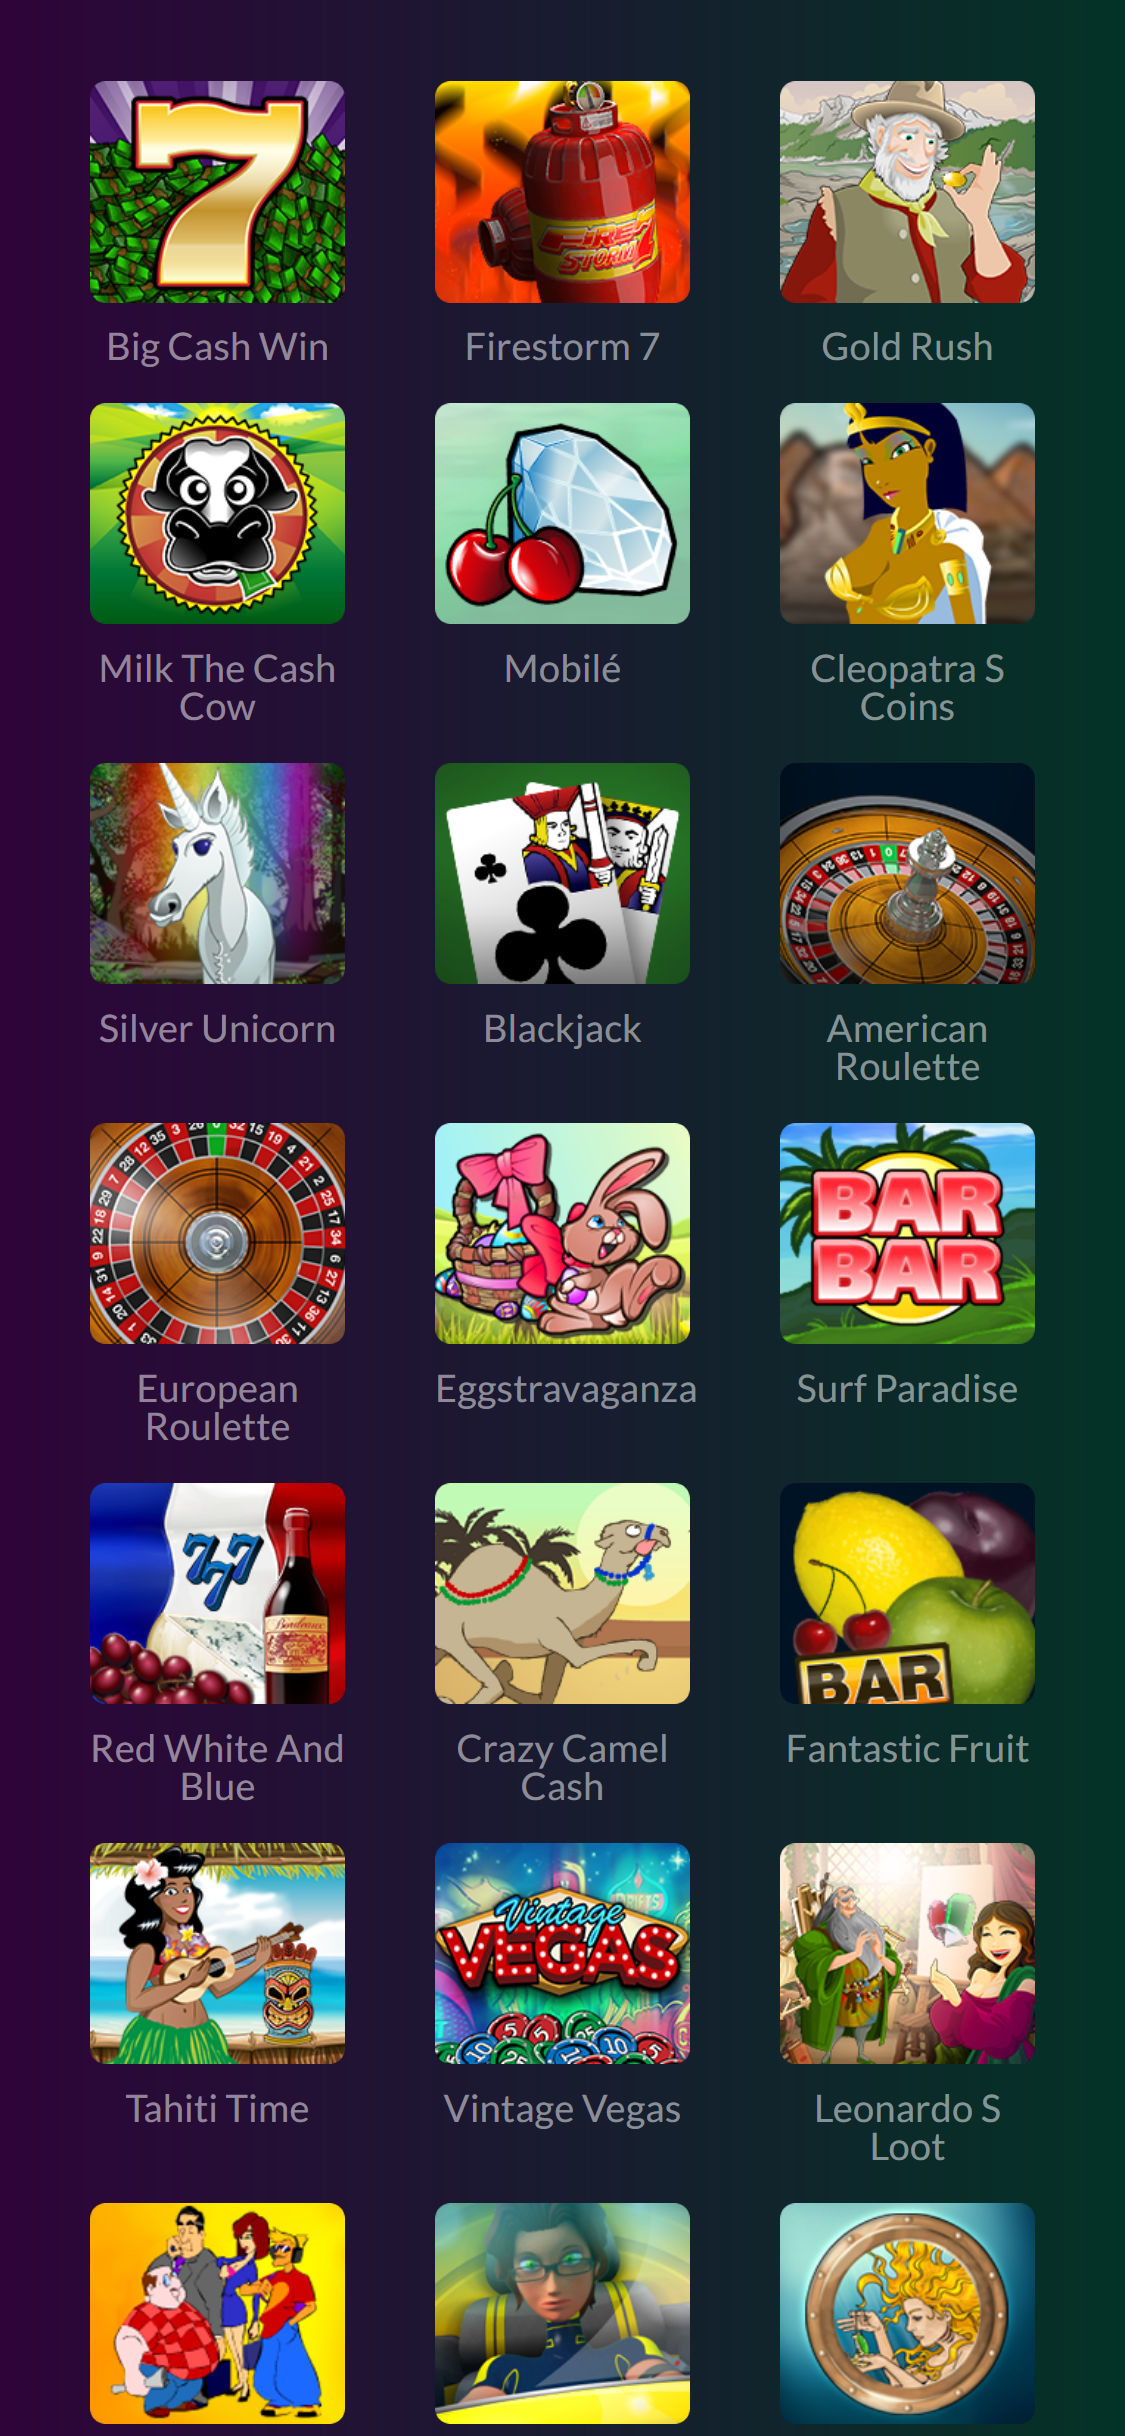 CrazyWinners Casino Mobile Games Review